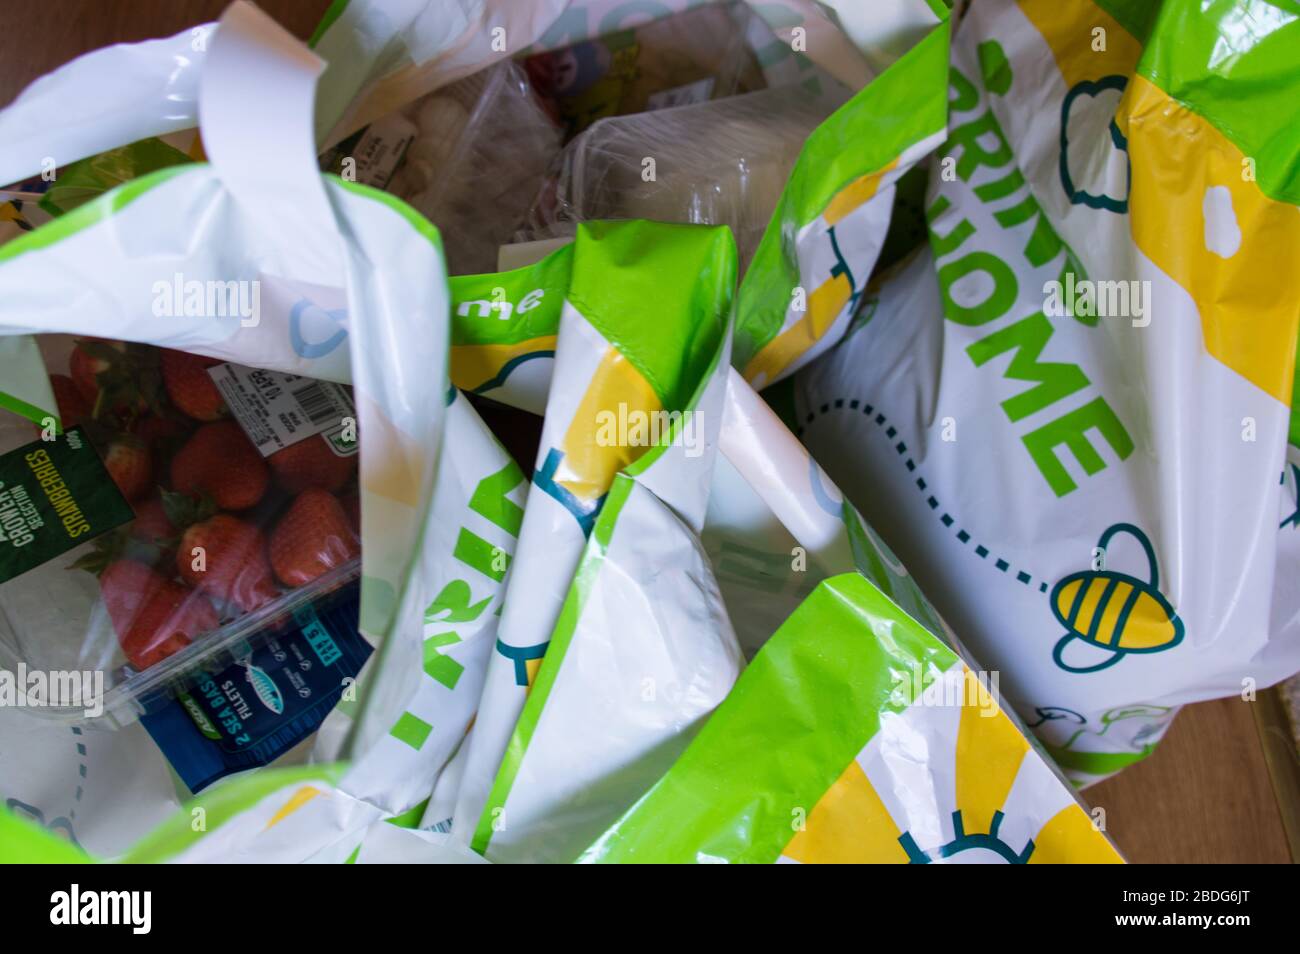 Grocery shopping bags from ASDA Stock Photo